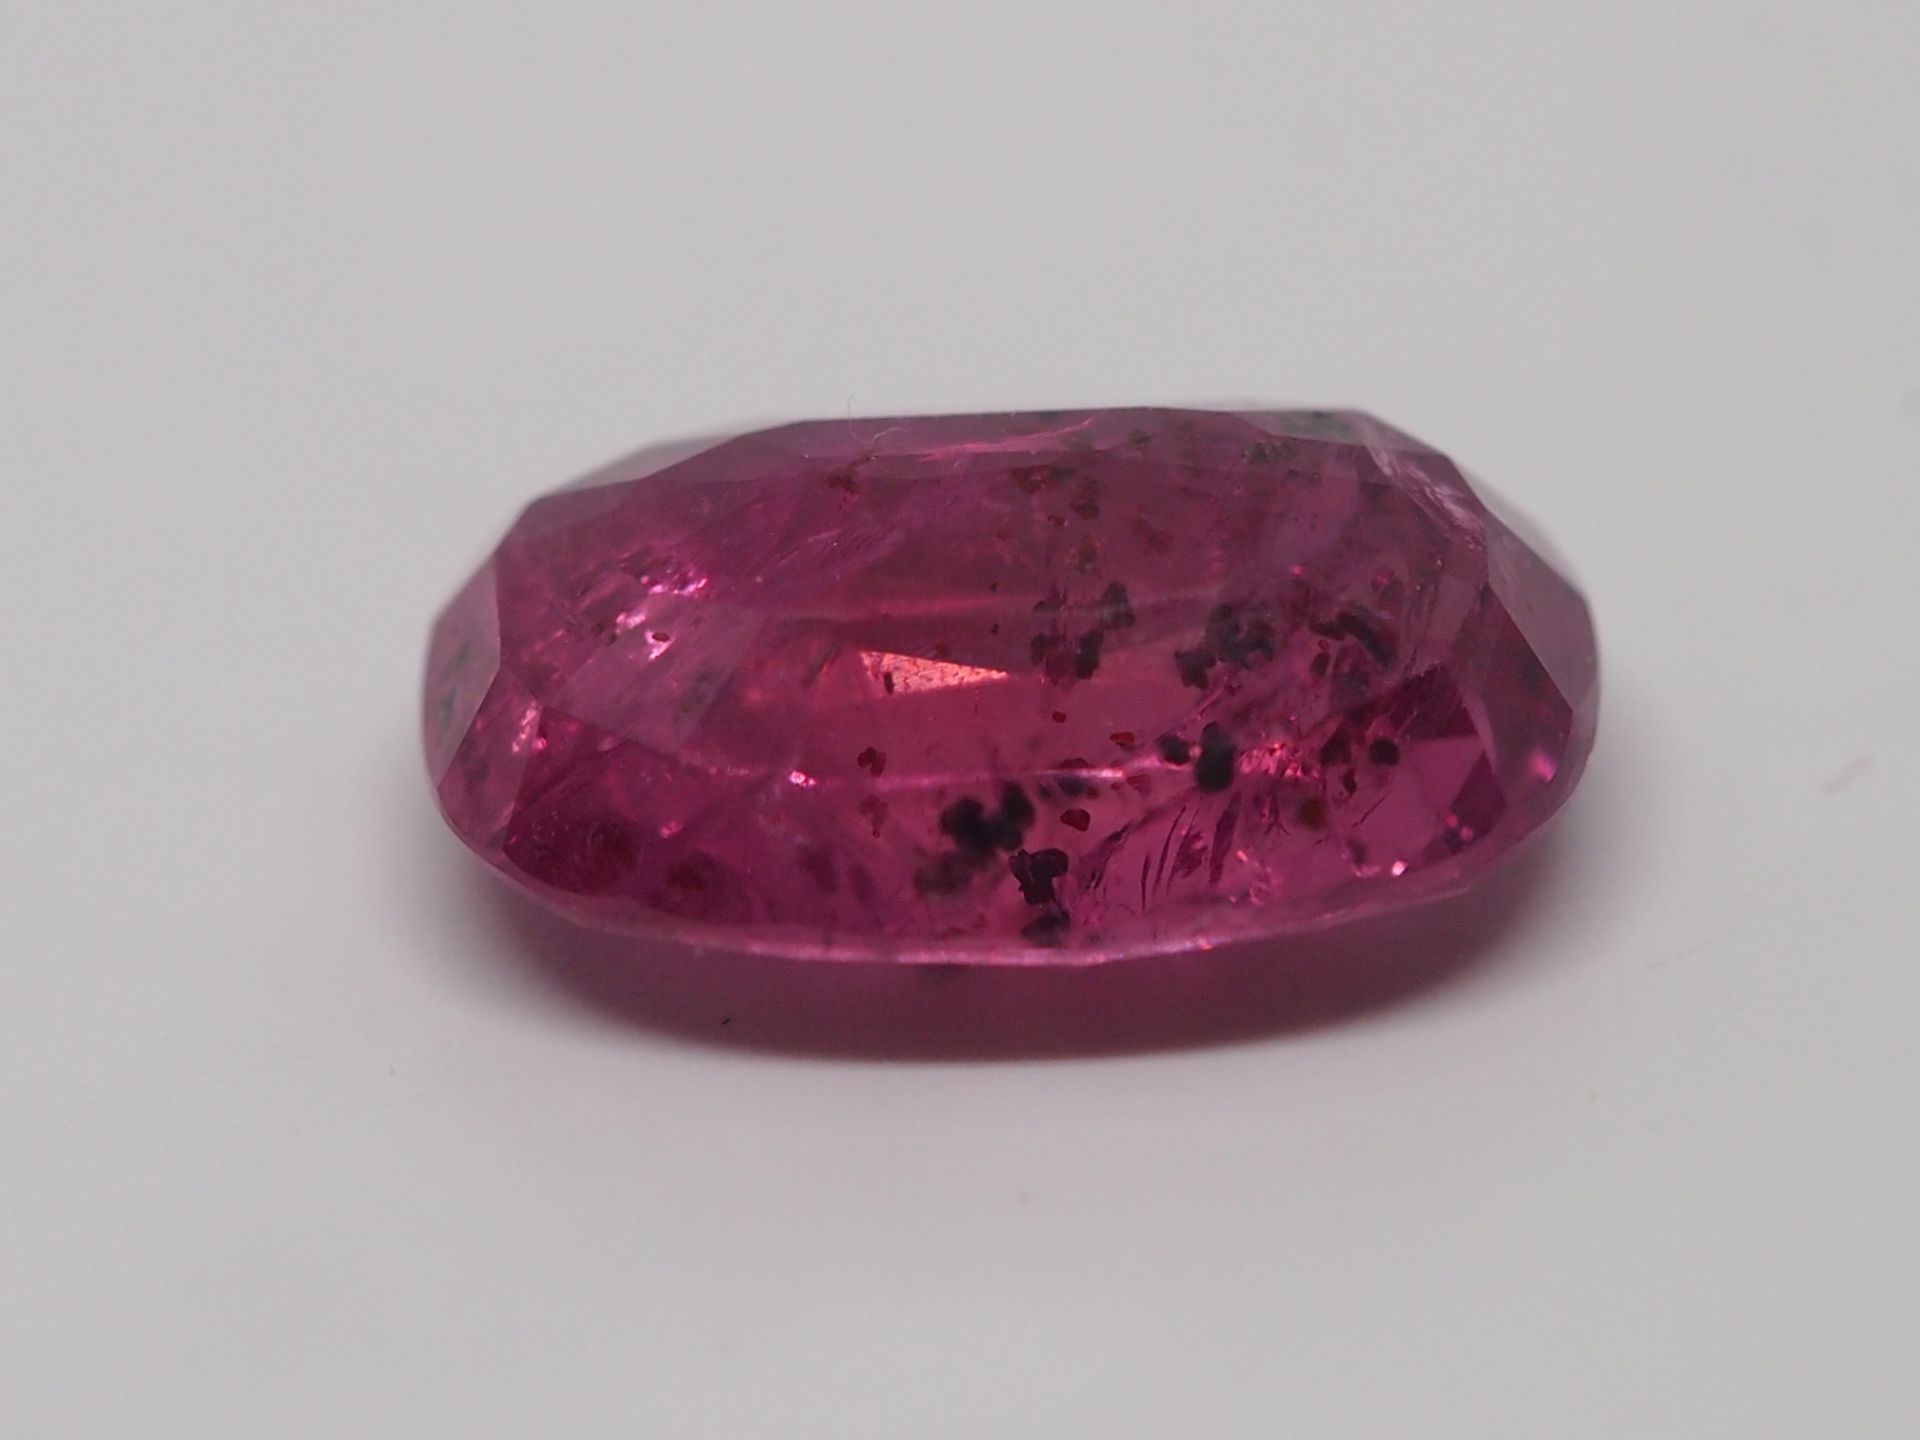 GIA Certified 5.15 ct Huge Natural Ruby Loose Stone - Image 7 of 8